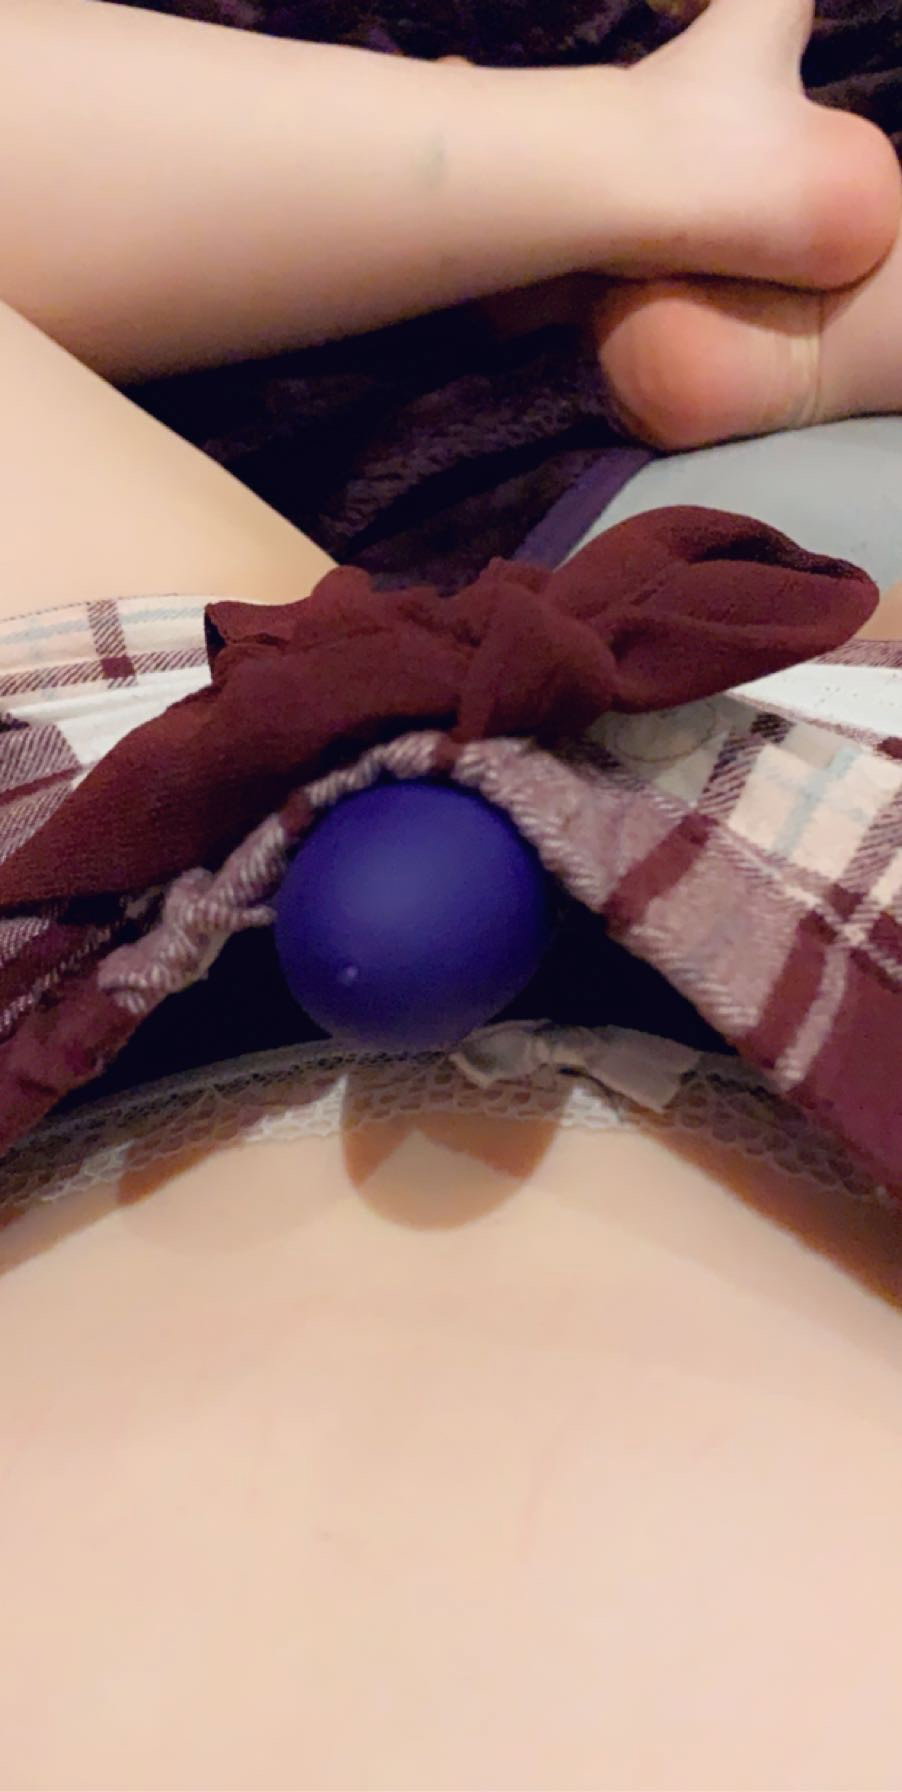 Photo by Imasecretdirtygirly with the username @Imasecretdirtygirly,  November 24, 2019 at 6:46 PM. The post is about the topic Masturbation and the text says 'does anyone else just sit there with their vibrator in their shorts? love the vibrations 😍🙈'